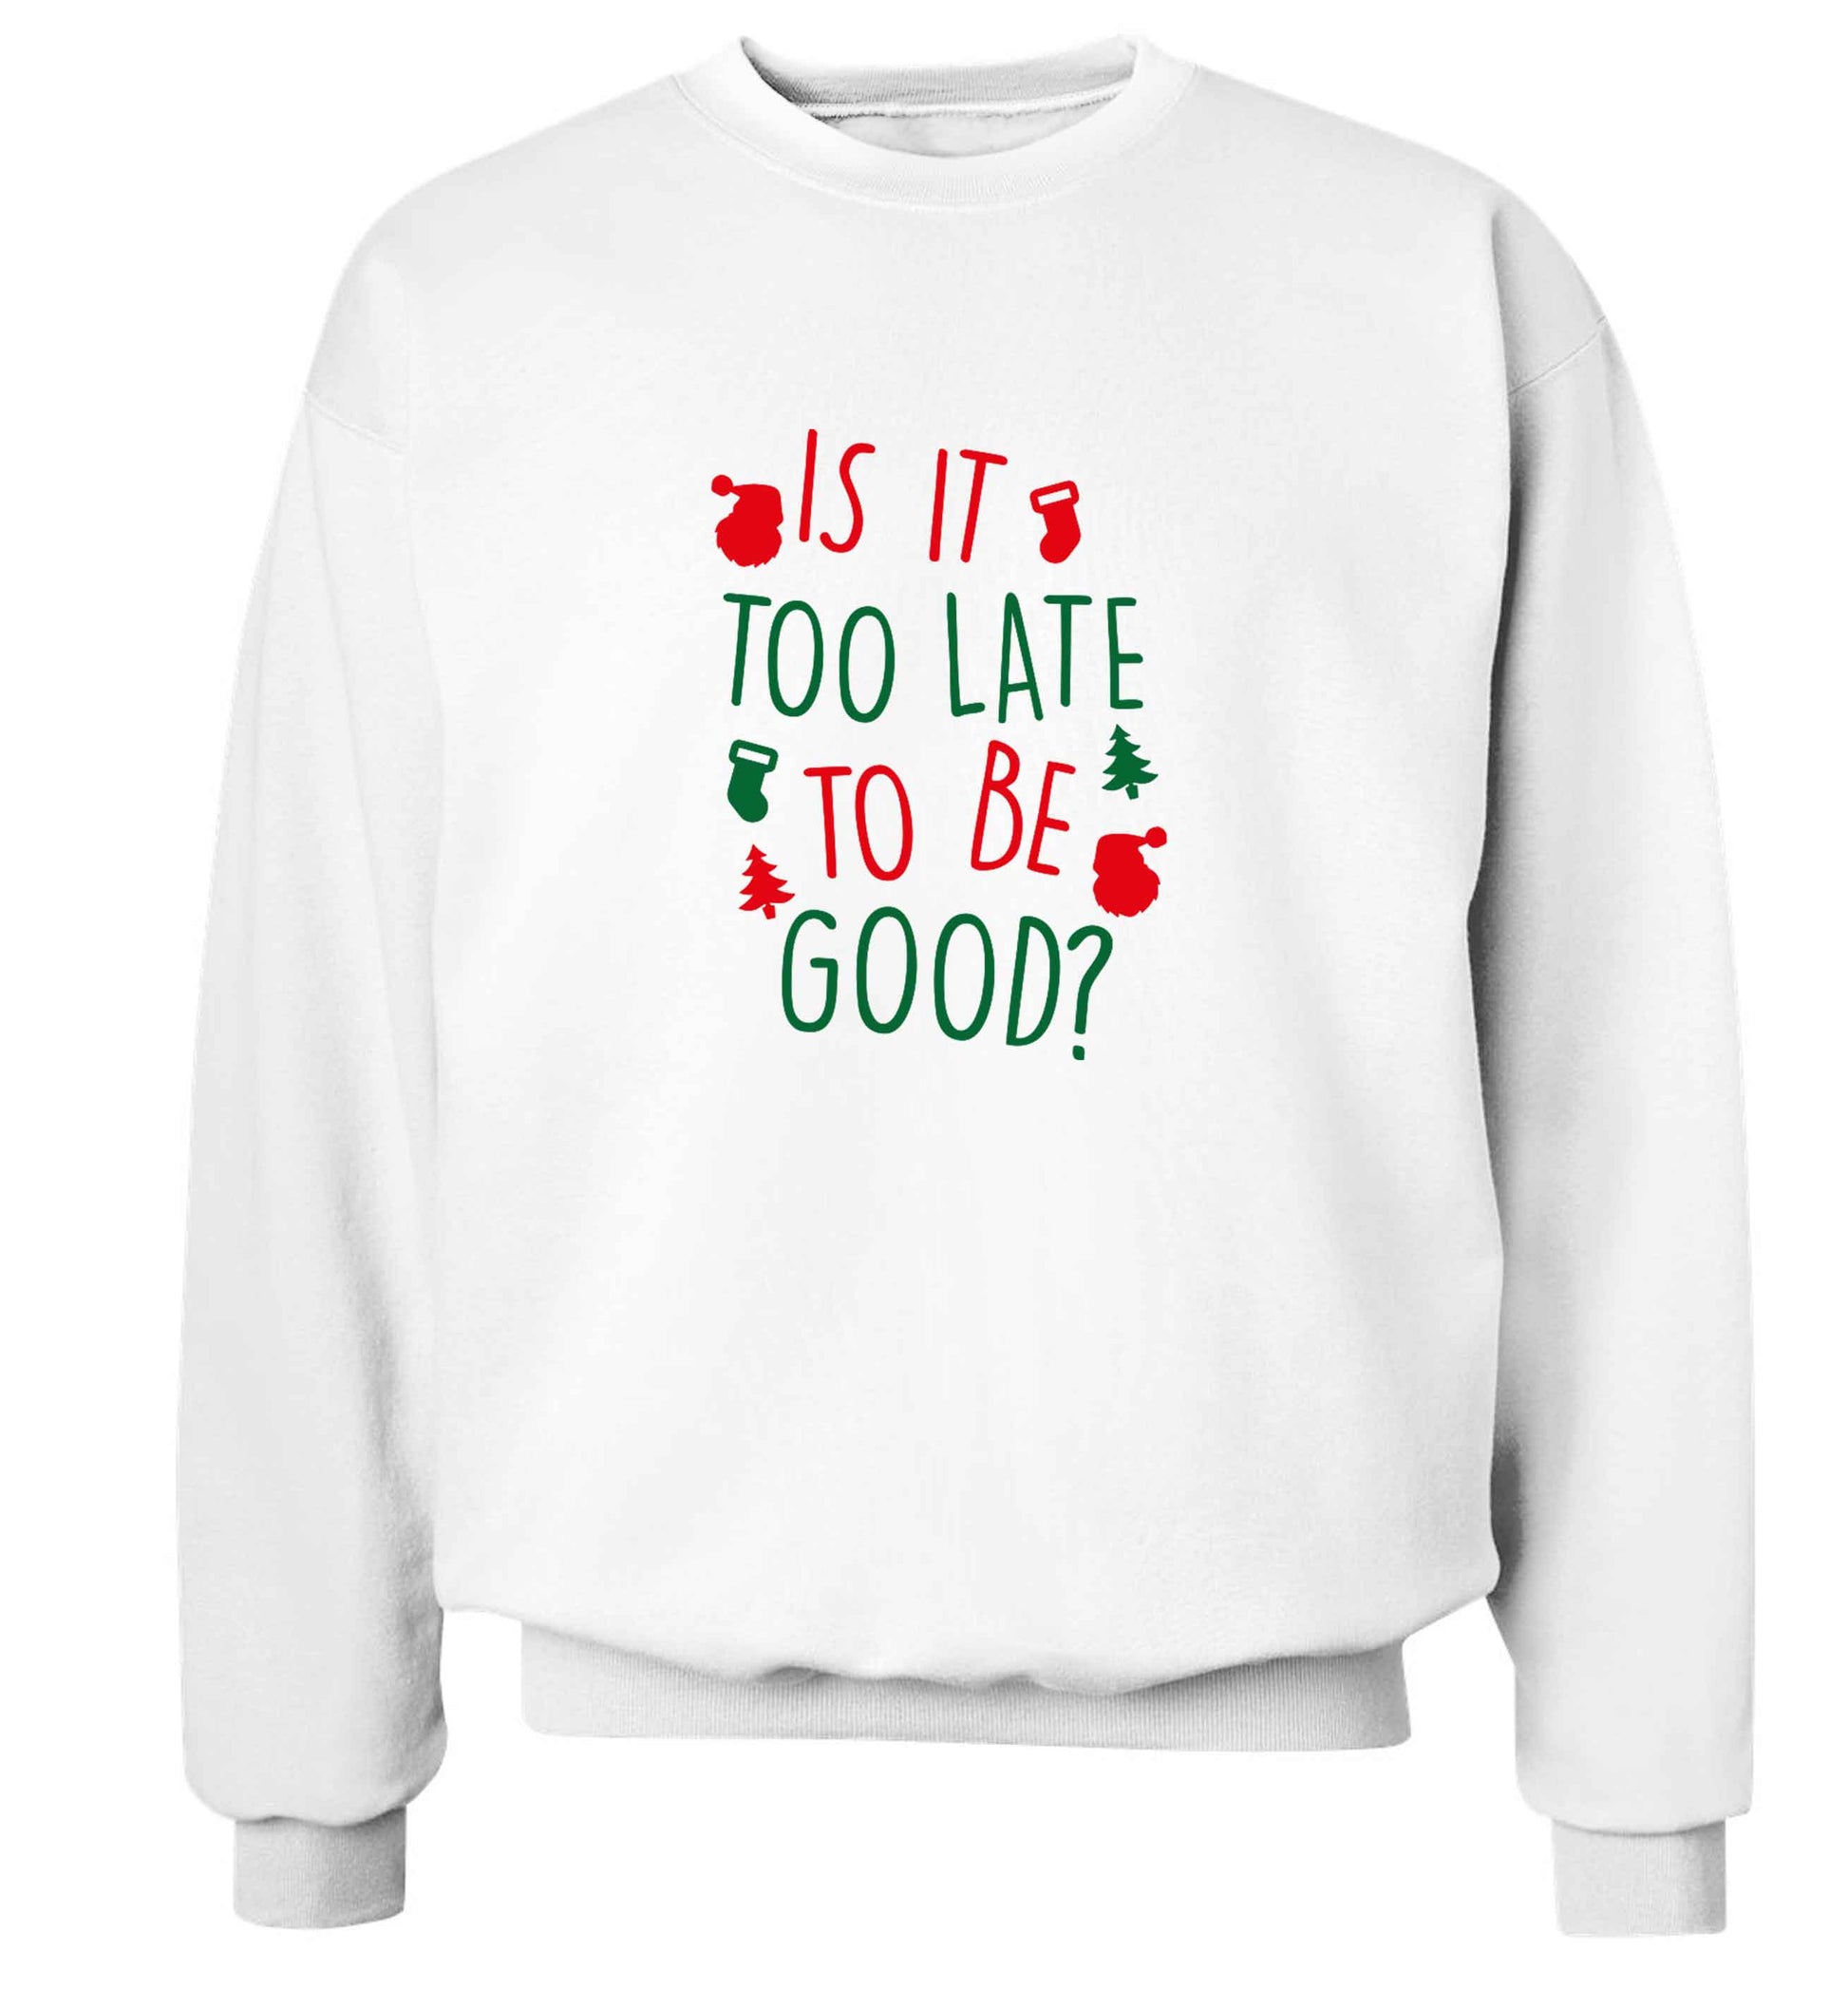 Too Late to be Good adult's unisex white sweater 2XL